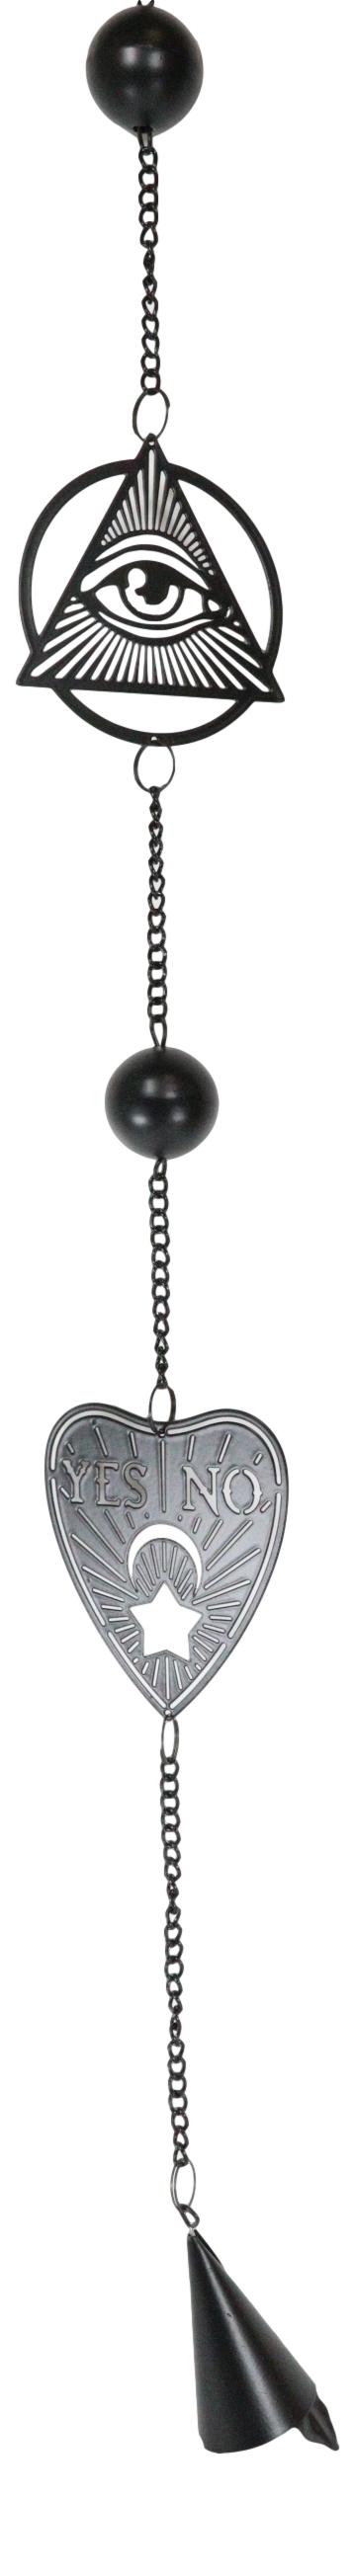 Ouija Planchette Eye Of Providence Metal Wall Hanging Mobile Wind Chime W/ Beads